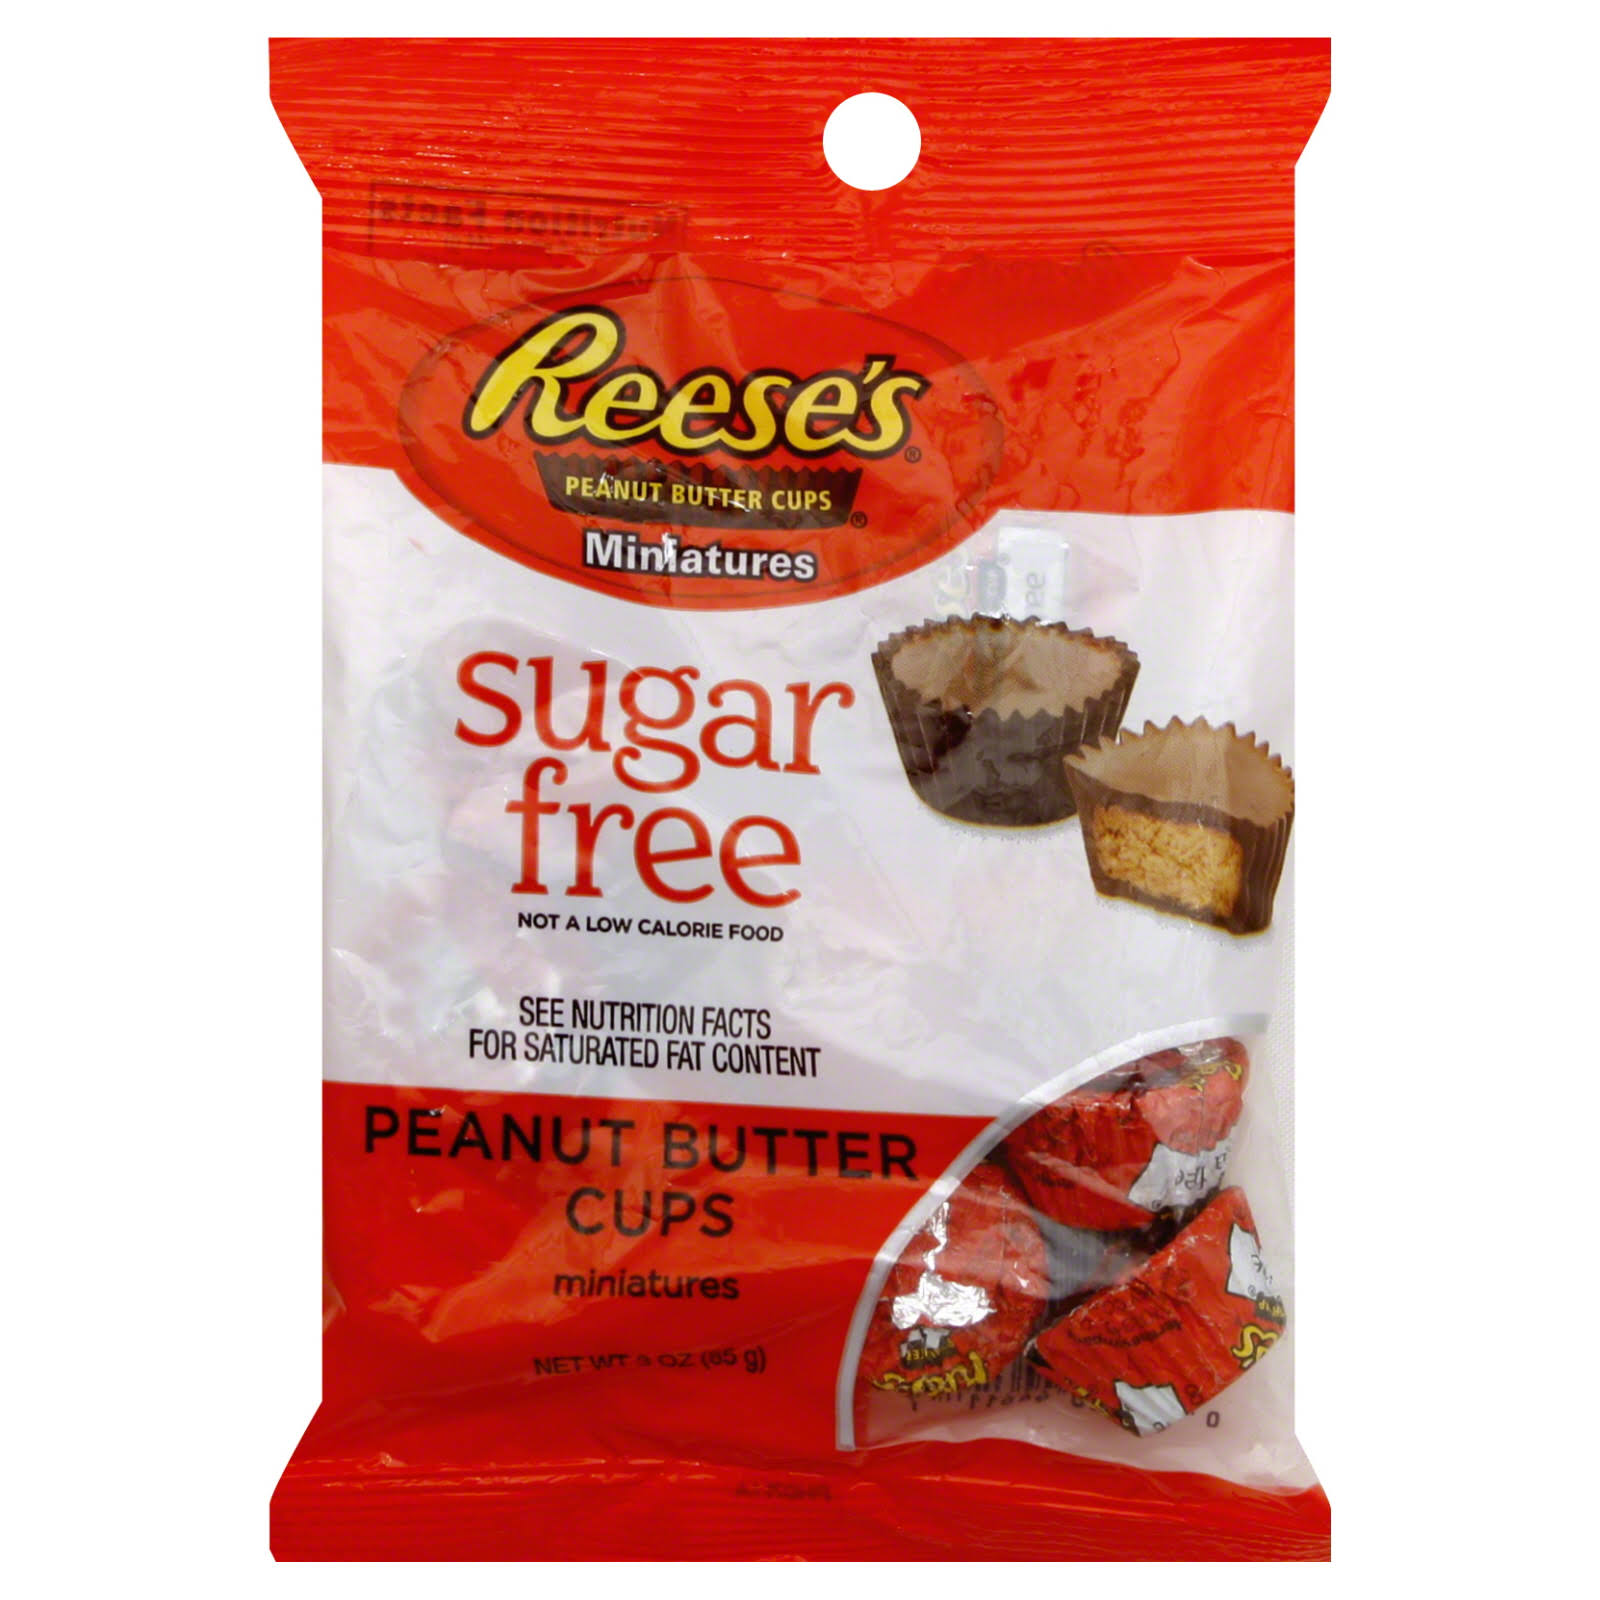 Reese's Sugar Free Peanut Butter Cup Miniatures